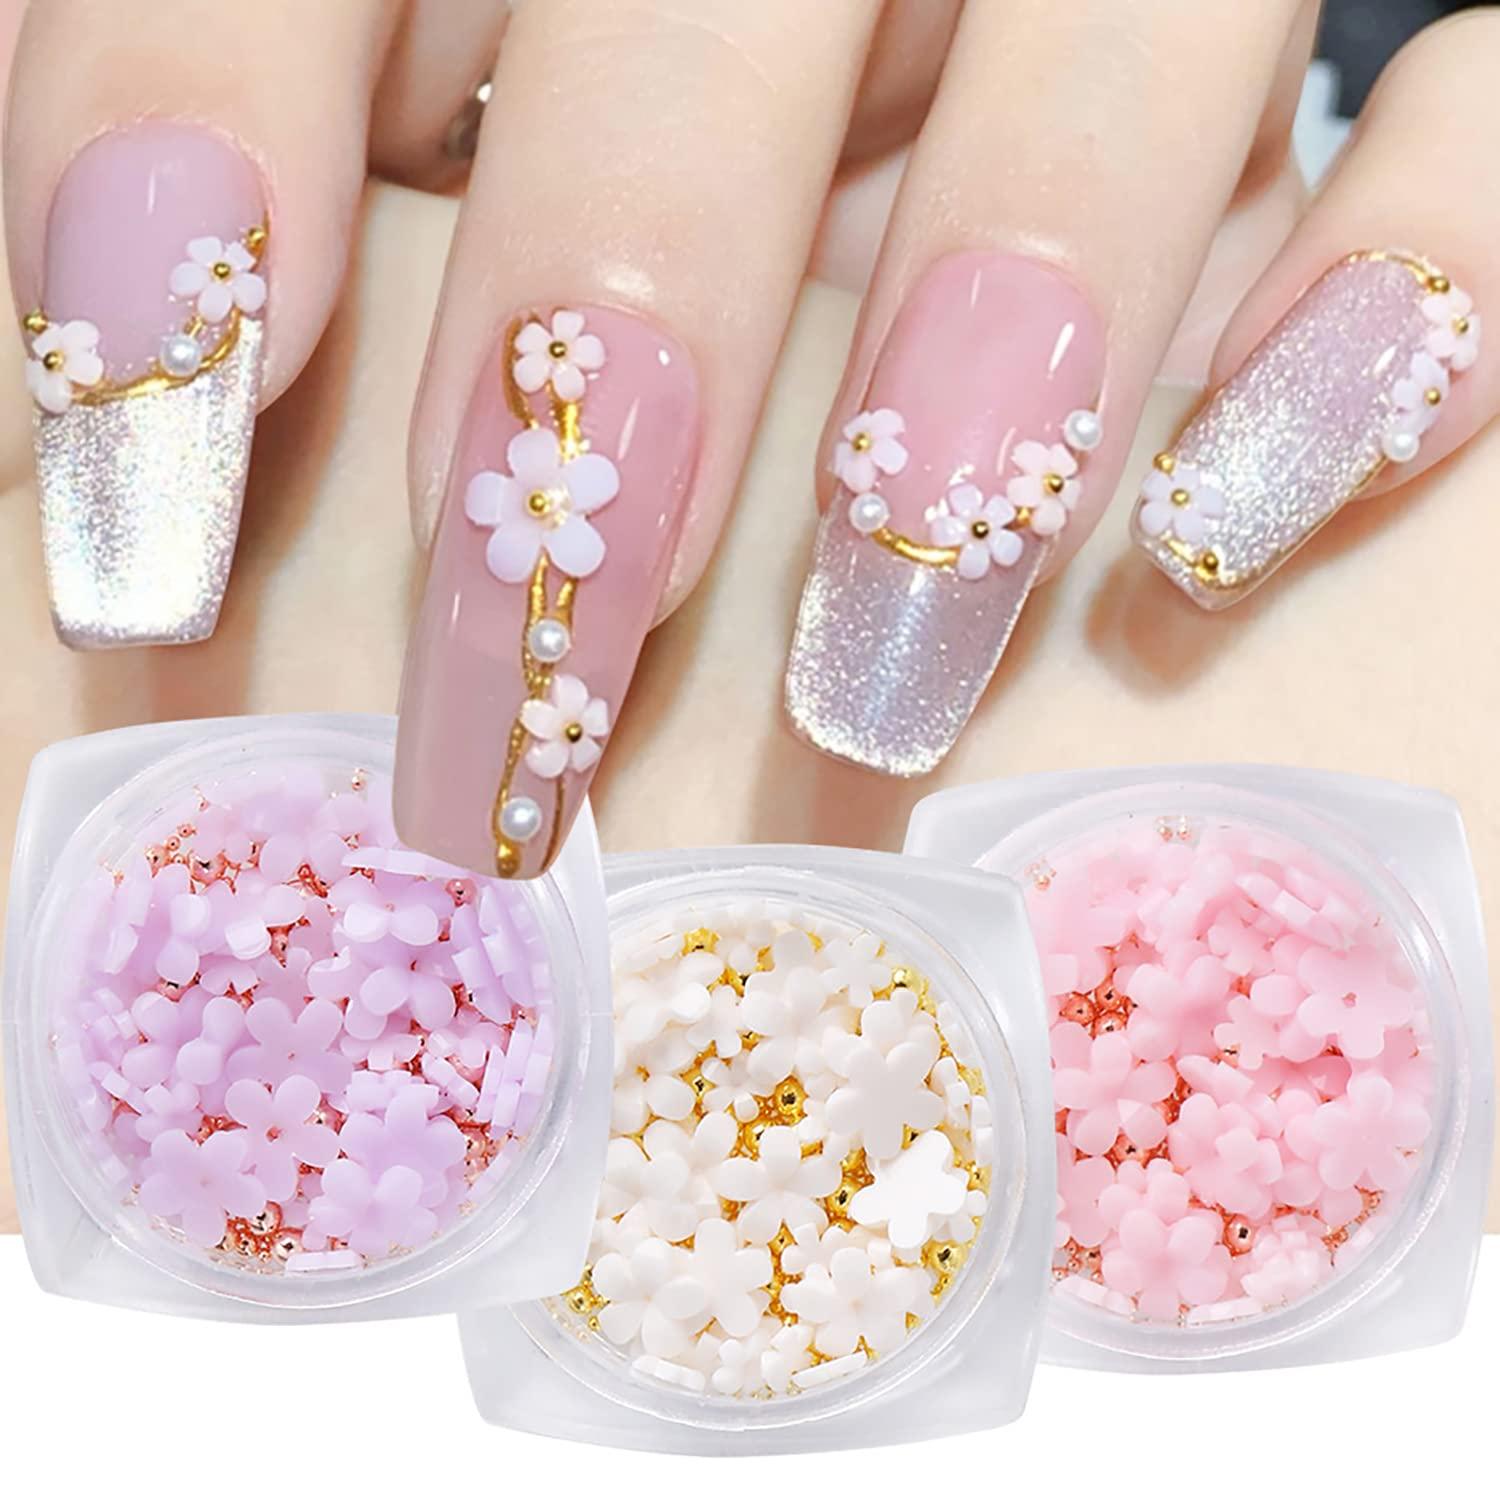 3d Flower Nail Charms For Acrylic Nails, 6 Grids 3d Nail Flowers Rhinestone